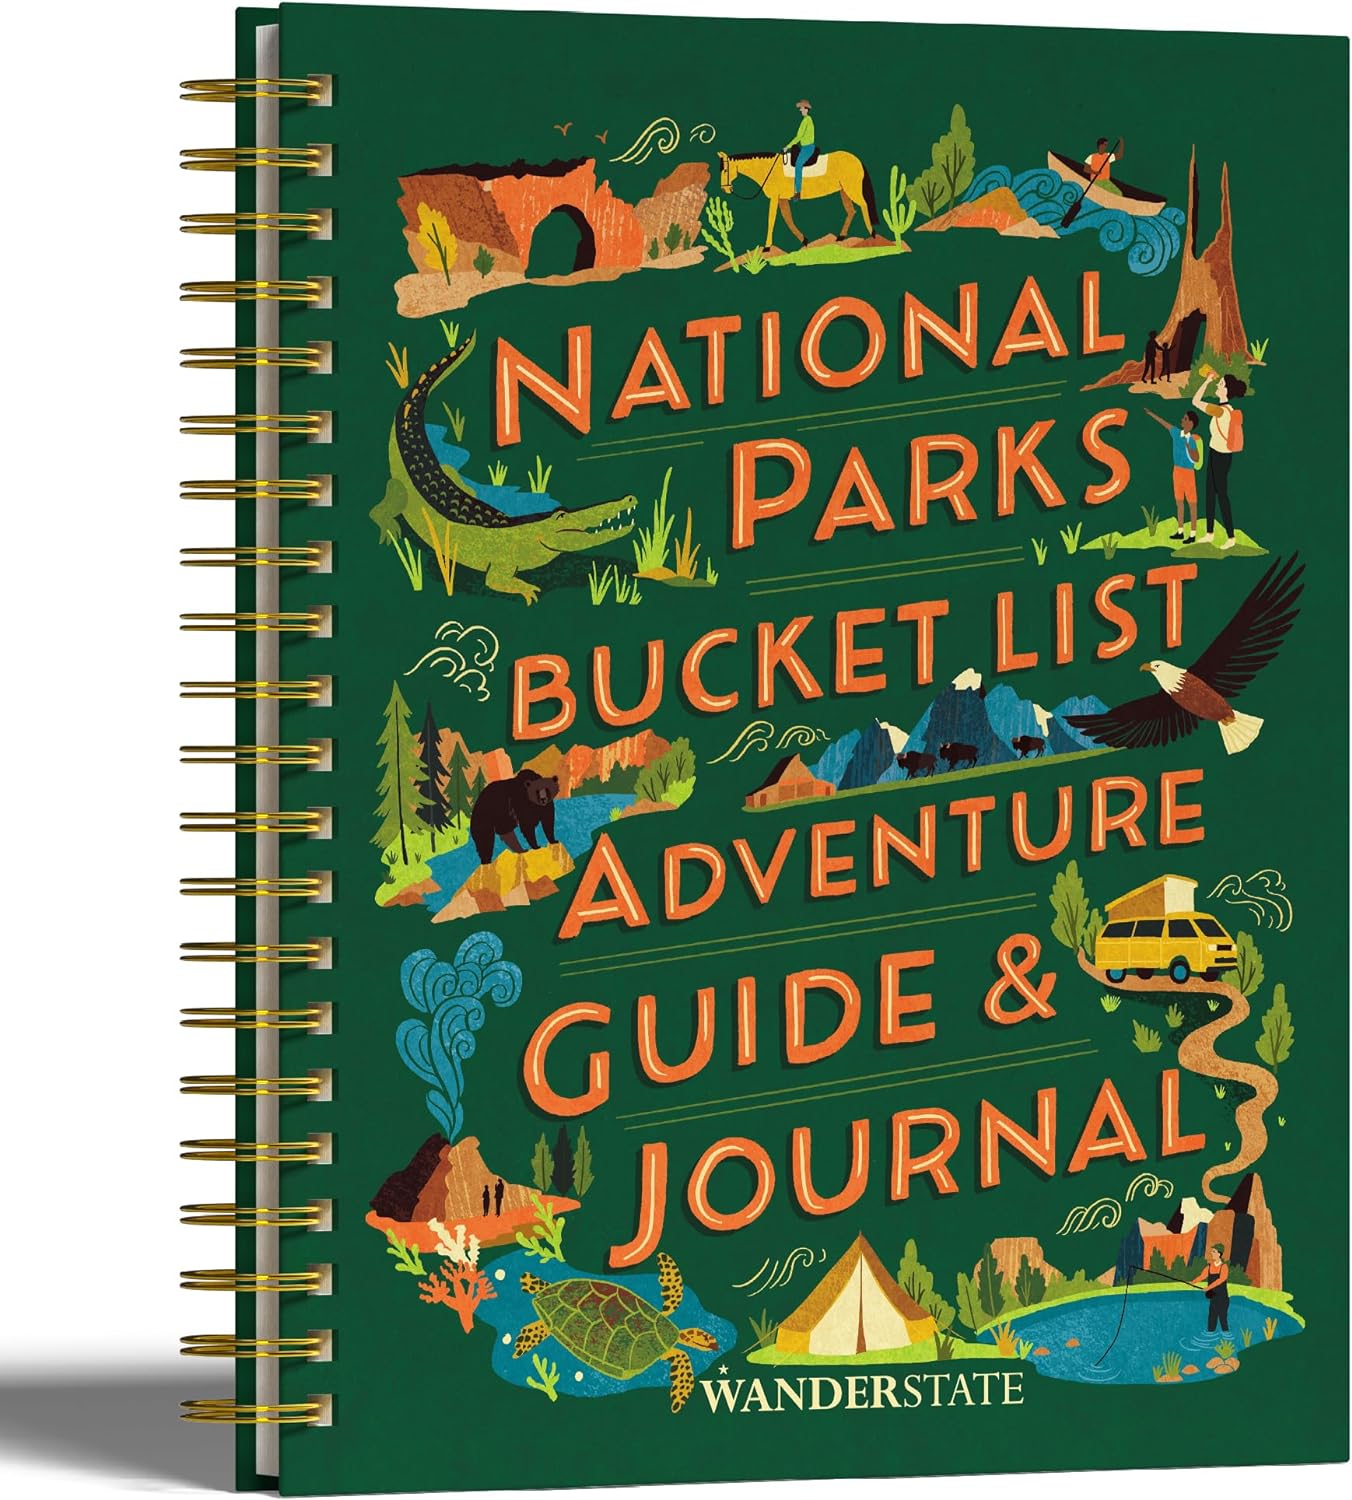 National Parks Bucket List Adventure Guide & Journal: Your Way to Explore America\\\'s National Parks & Document Your Adventures for a Lifetime! (Planner, Travel Guide, Journal, Passport Stamp Book)